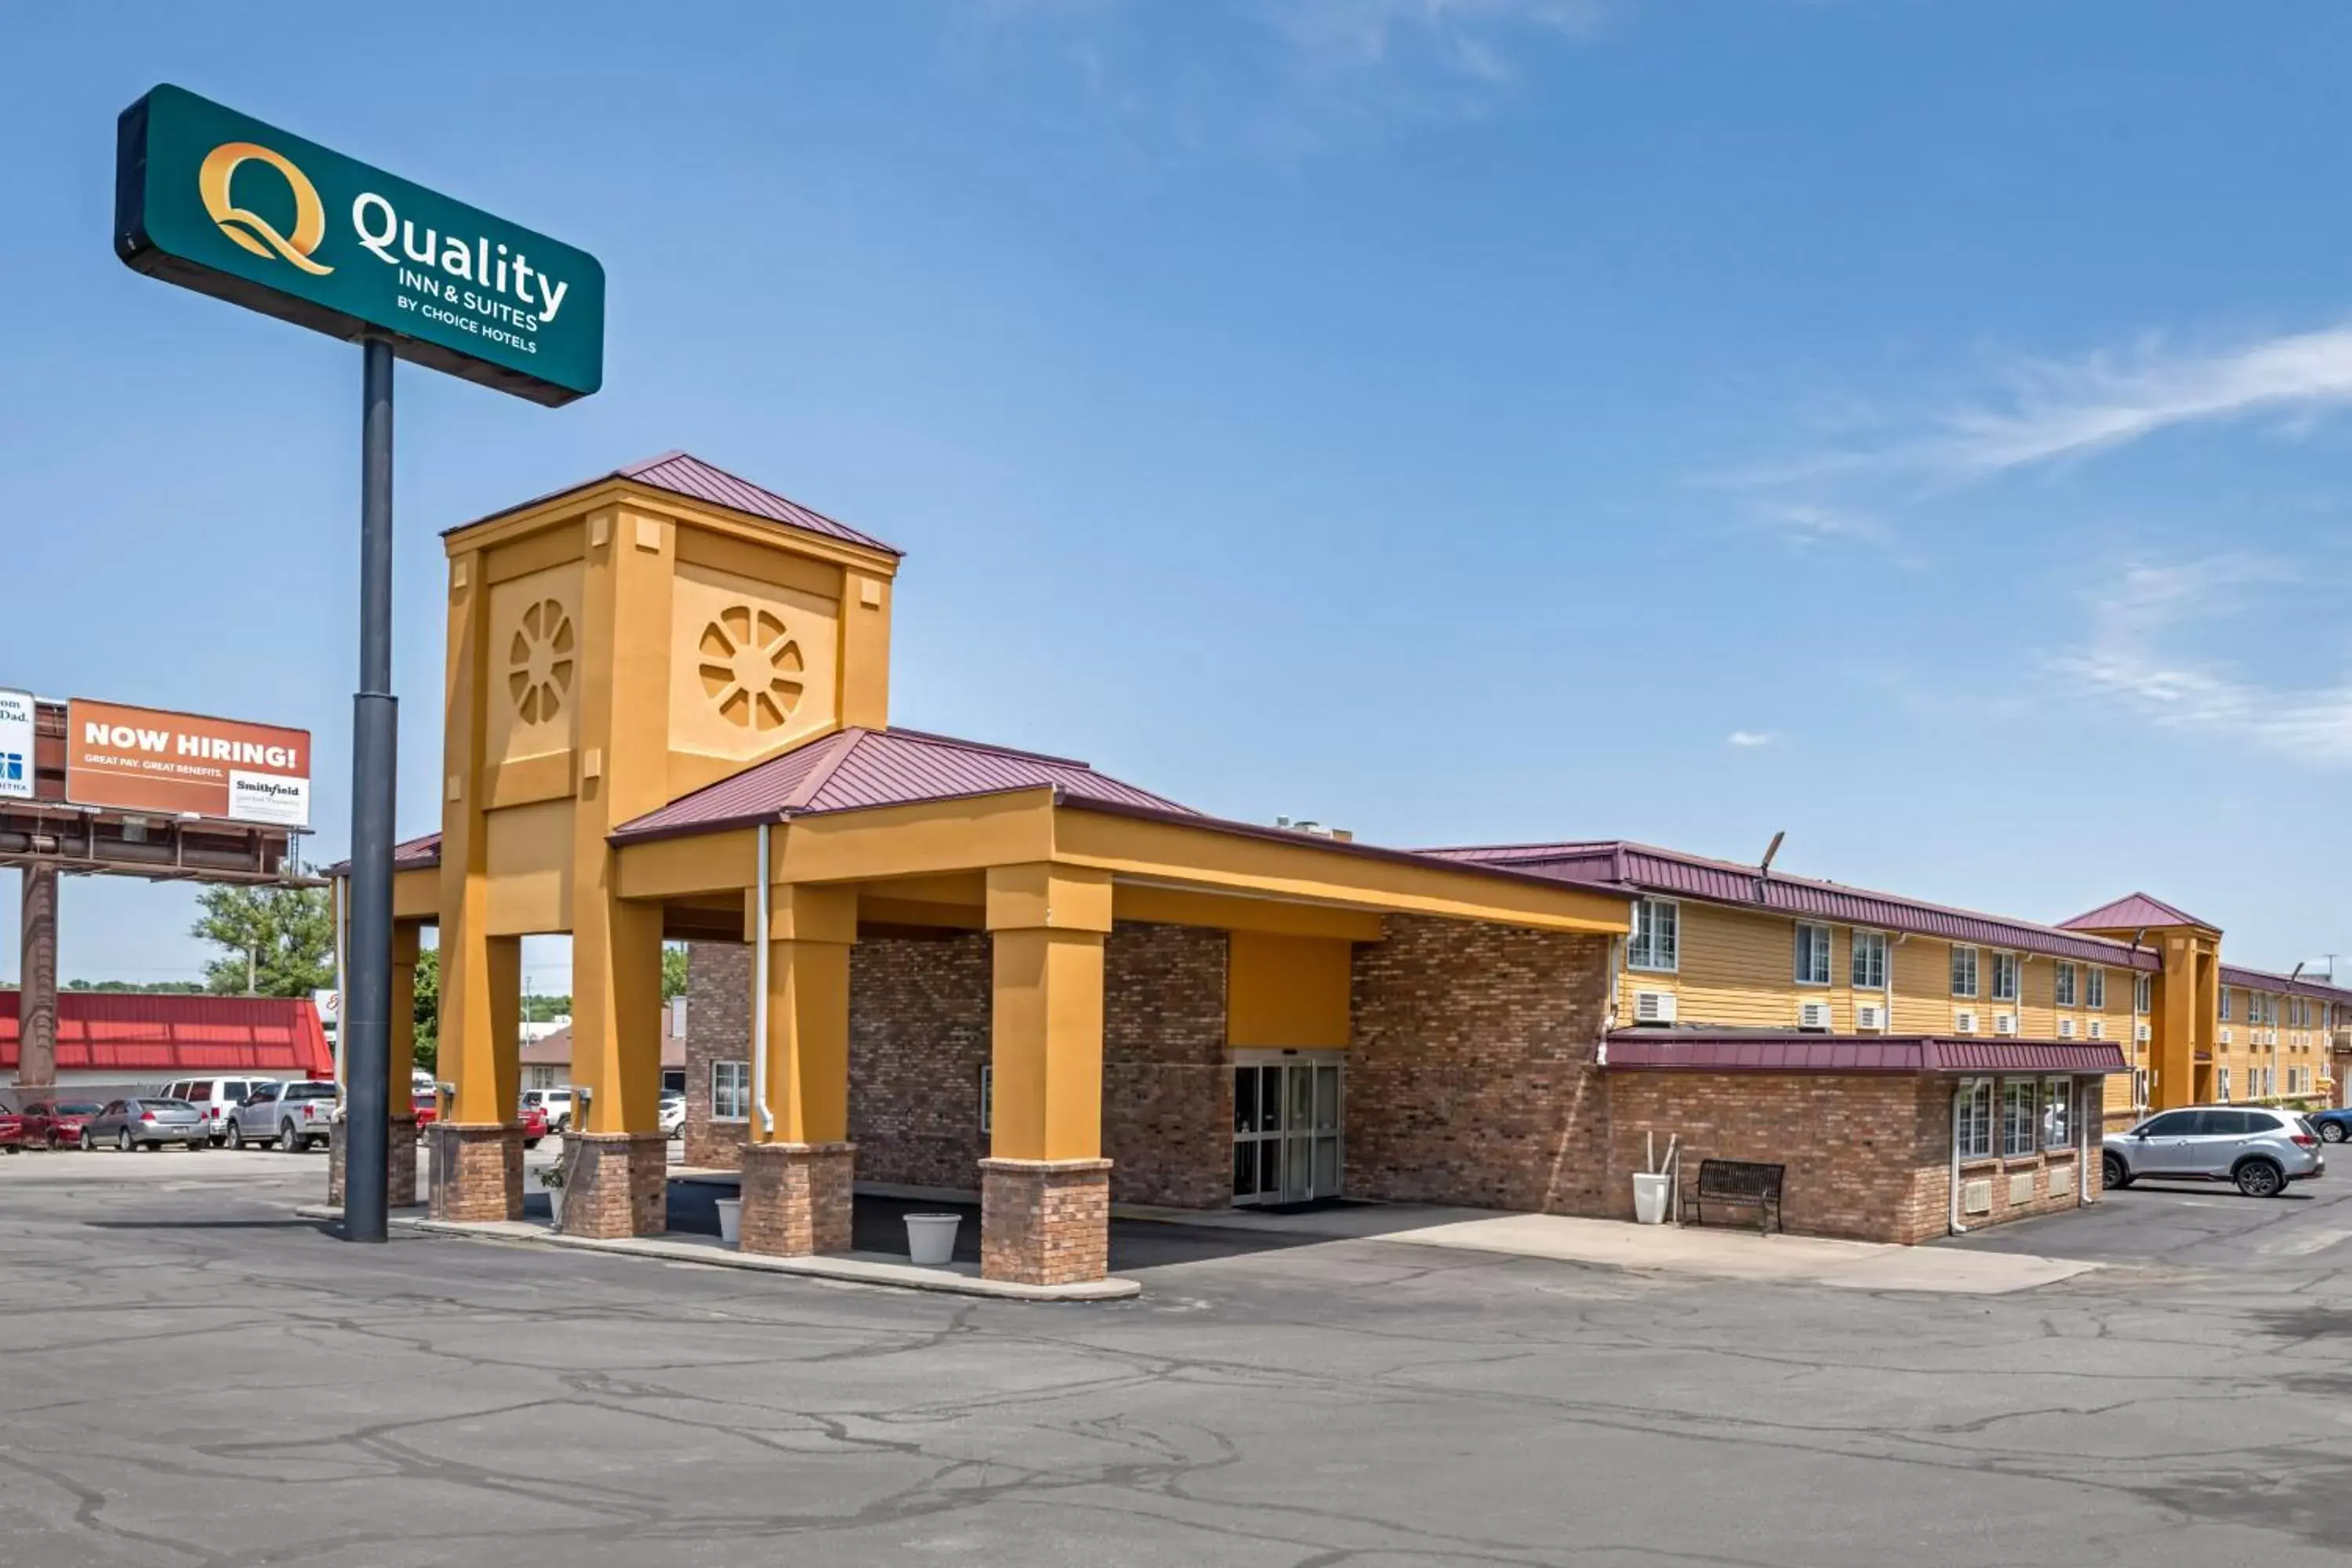 Property Building in Quality Inn and Suites Lincoln